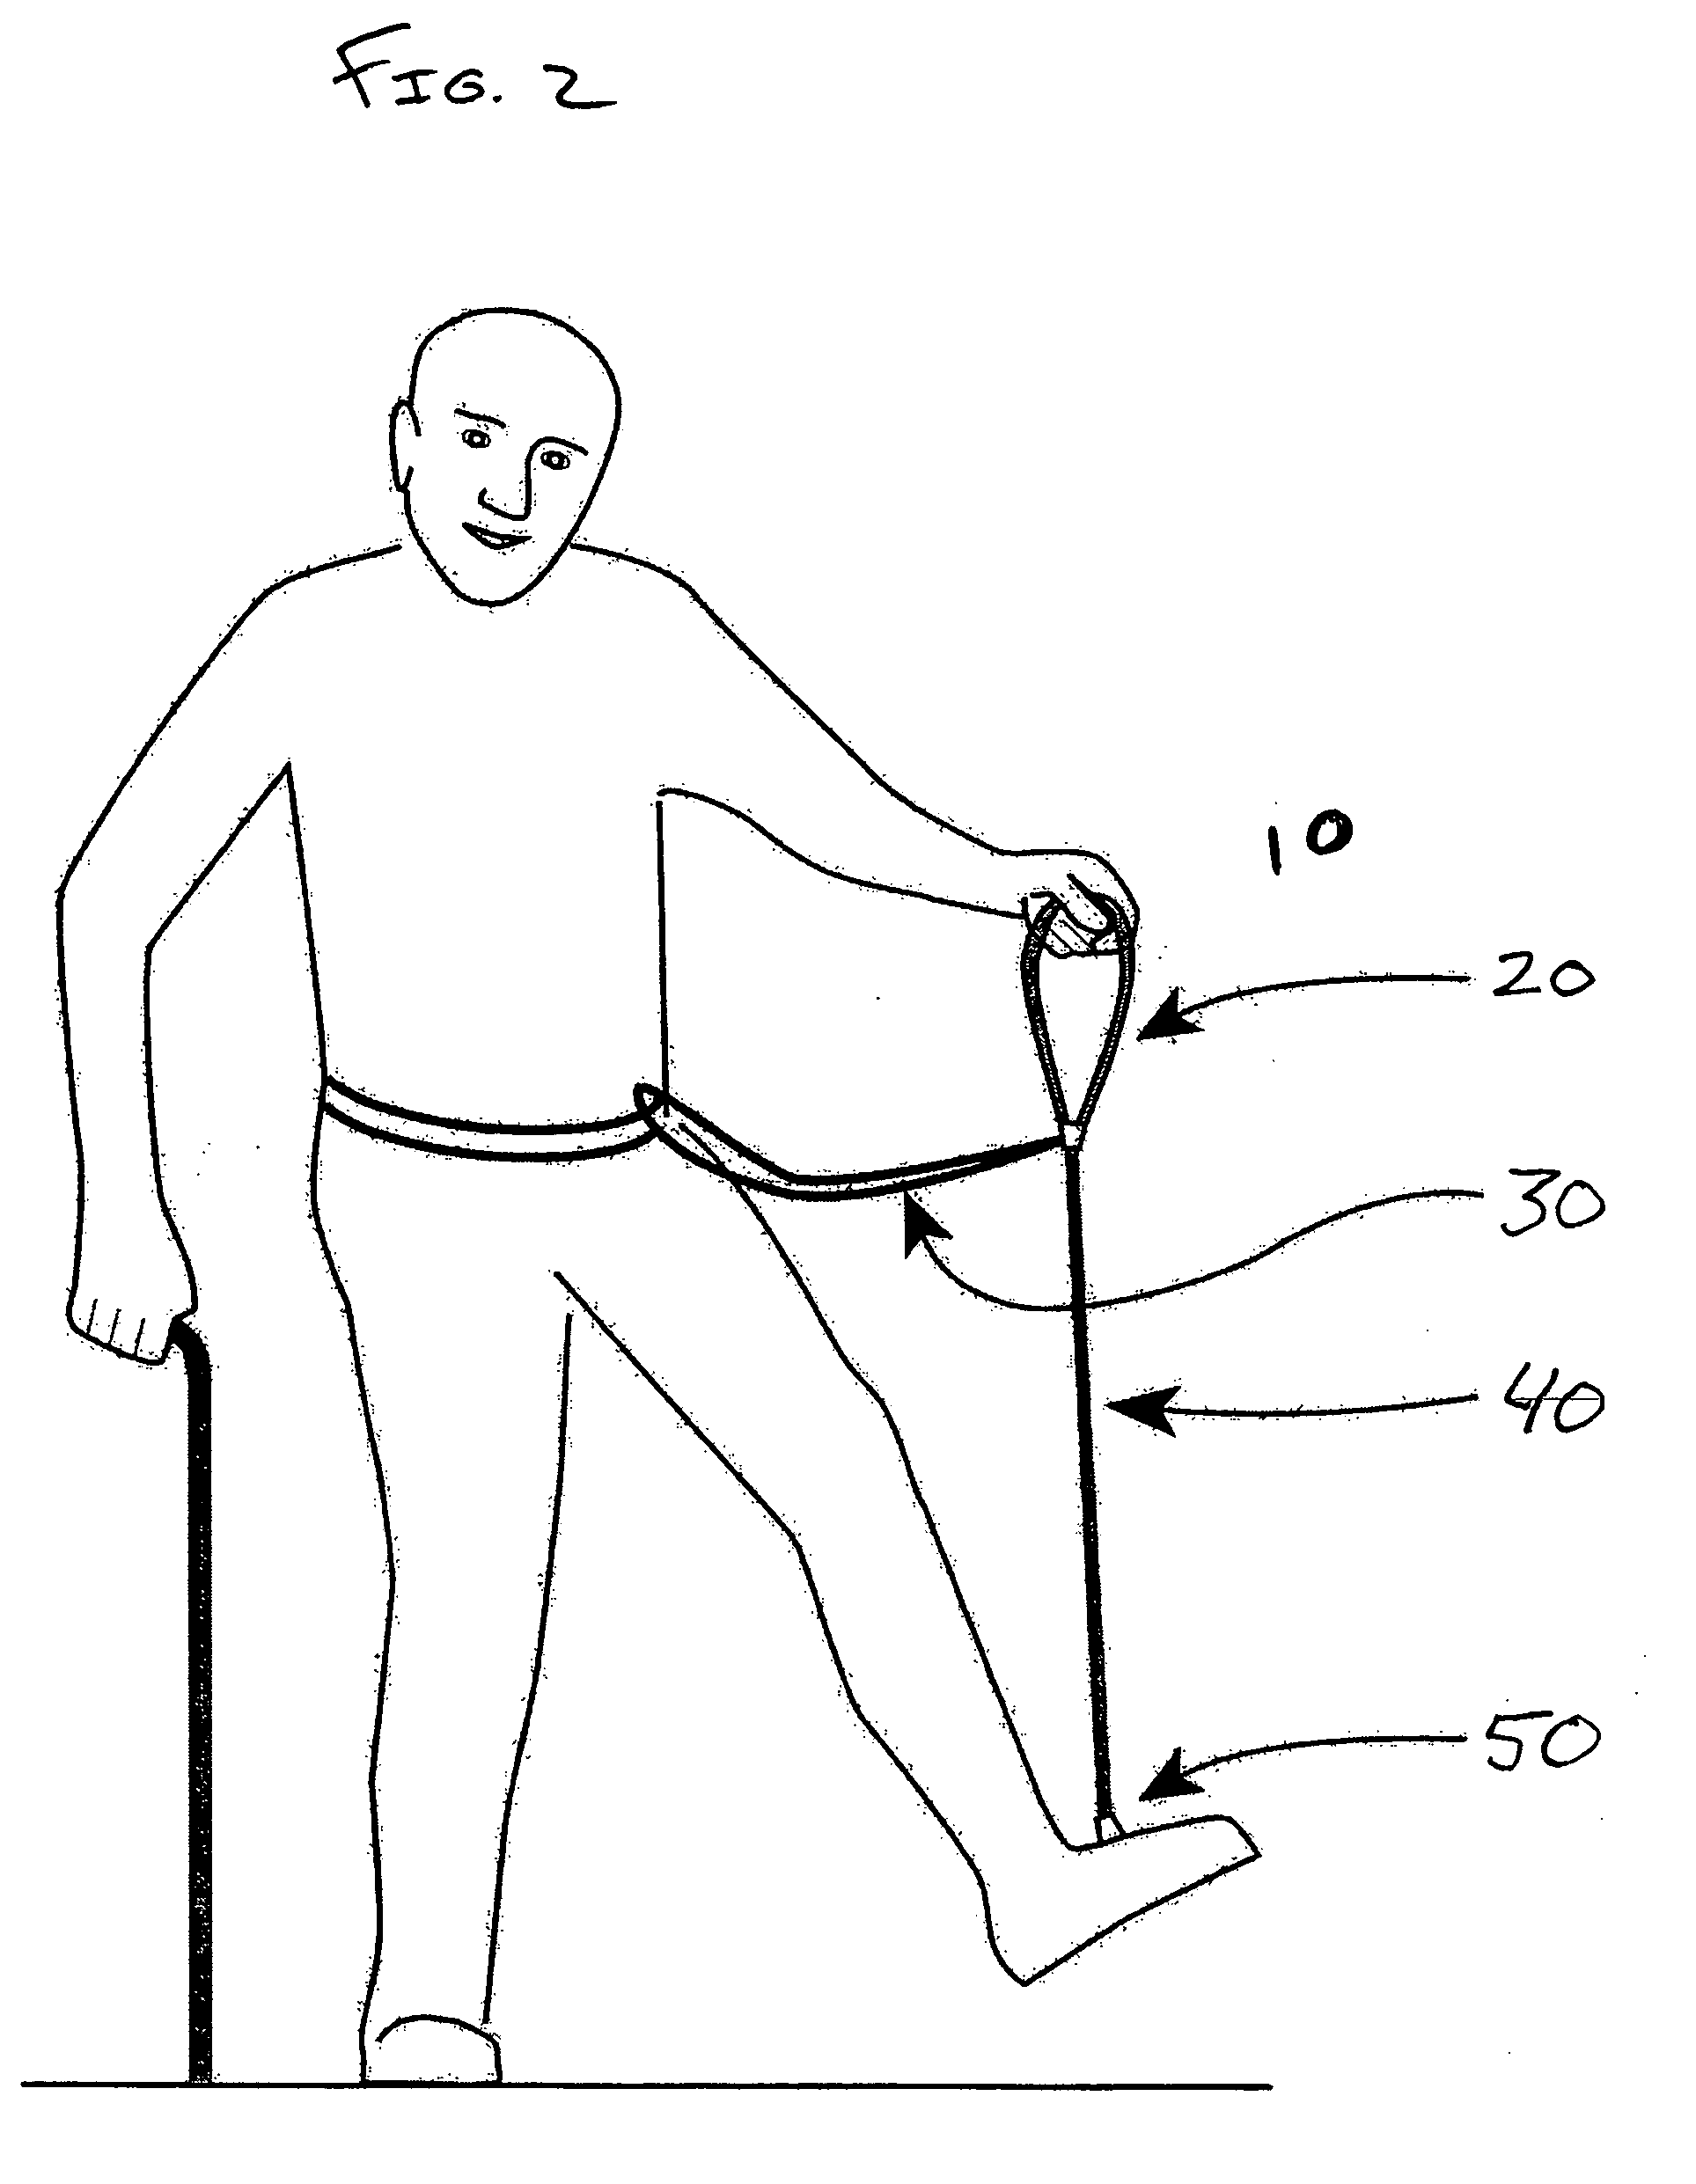 Device for assisted movement of a disabled leg